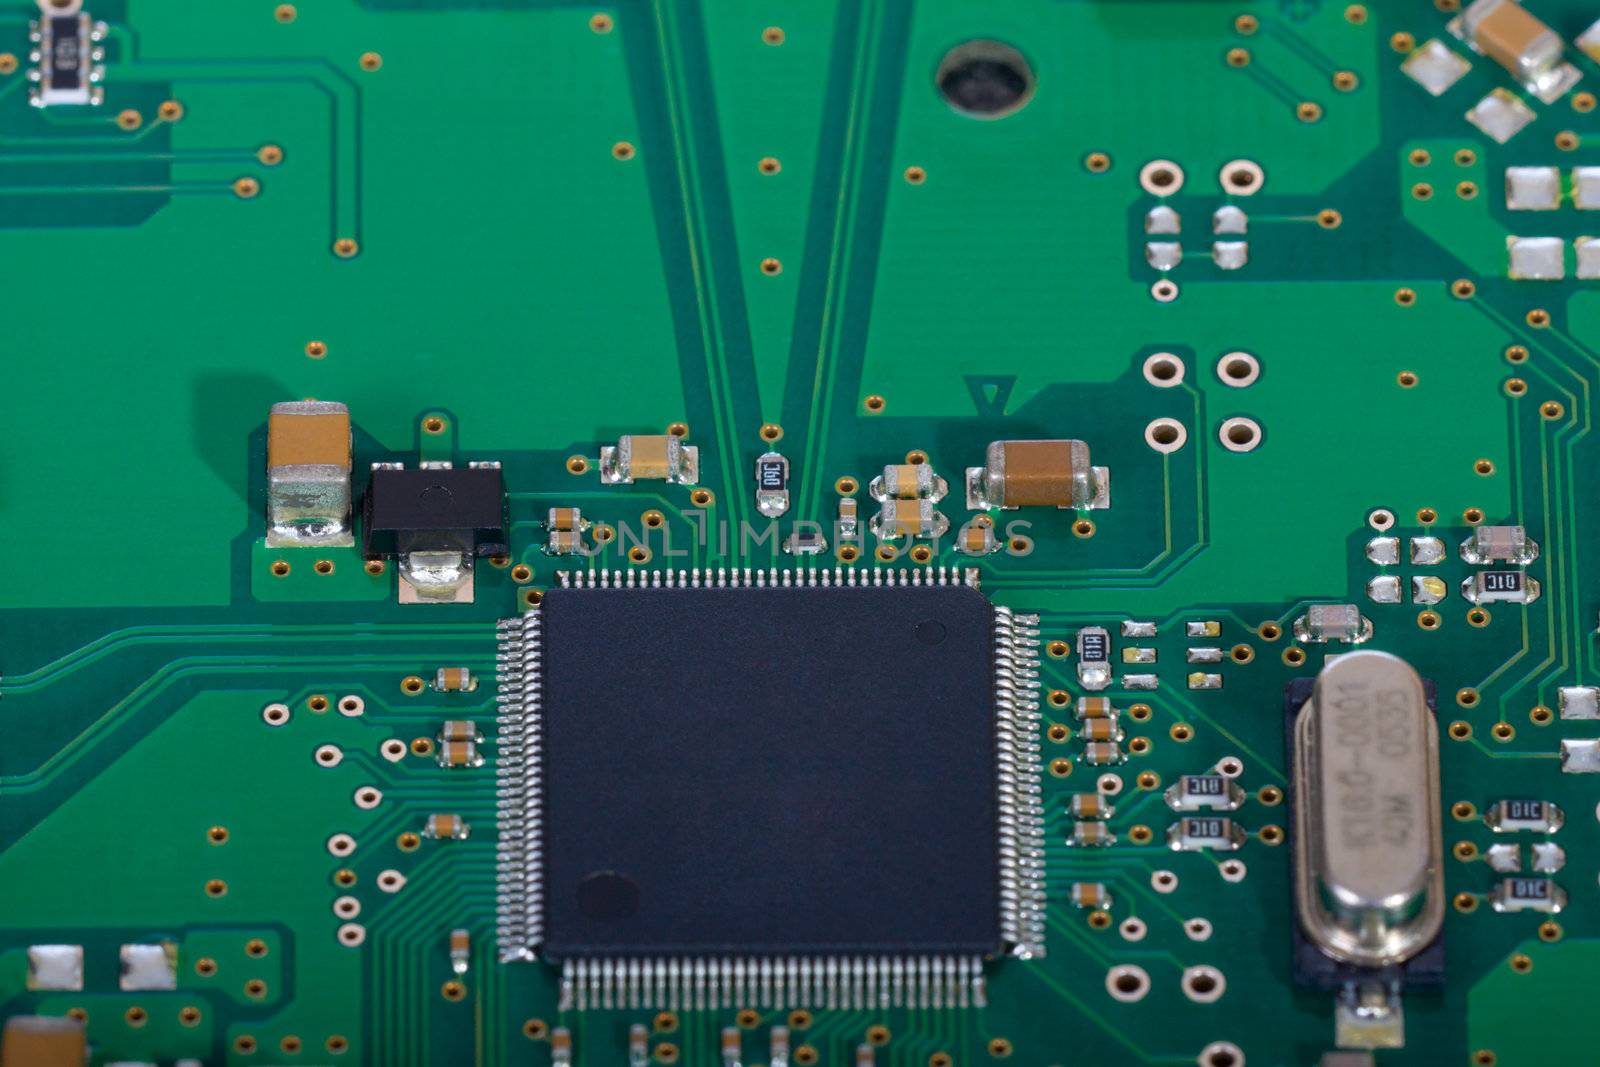 Detail of the front of a printed circuit board 